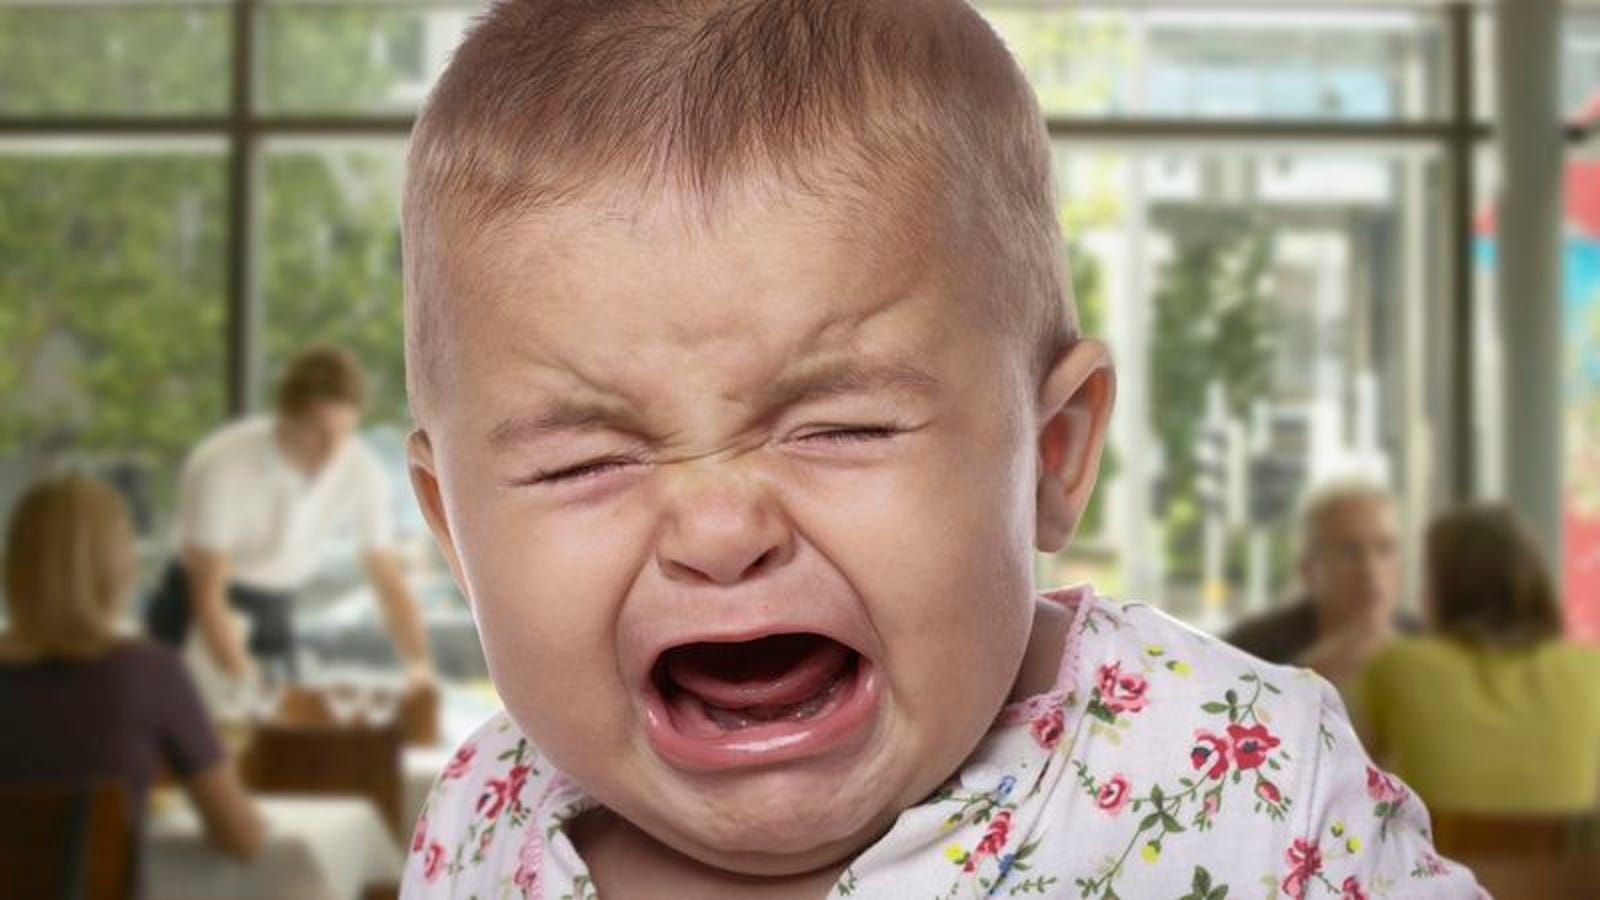 Parents Of Crying Child Must Not Be Any Good